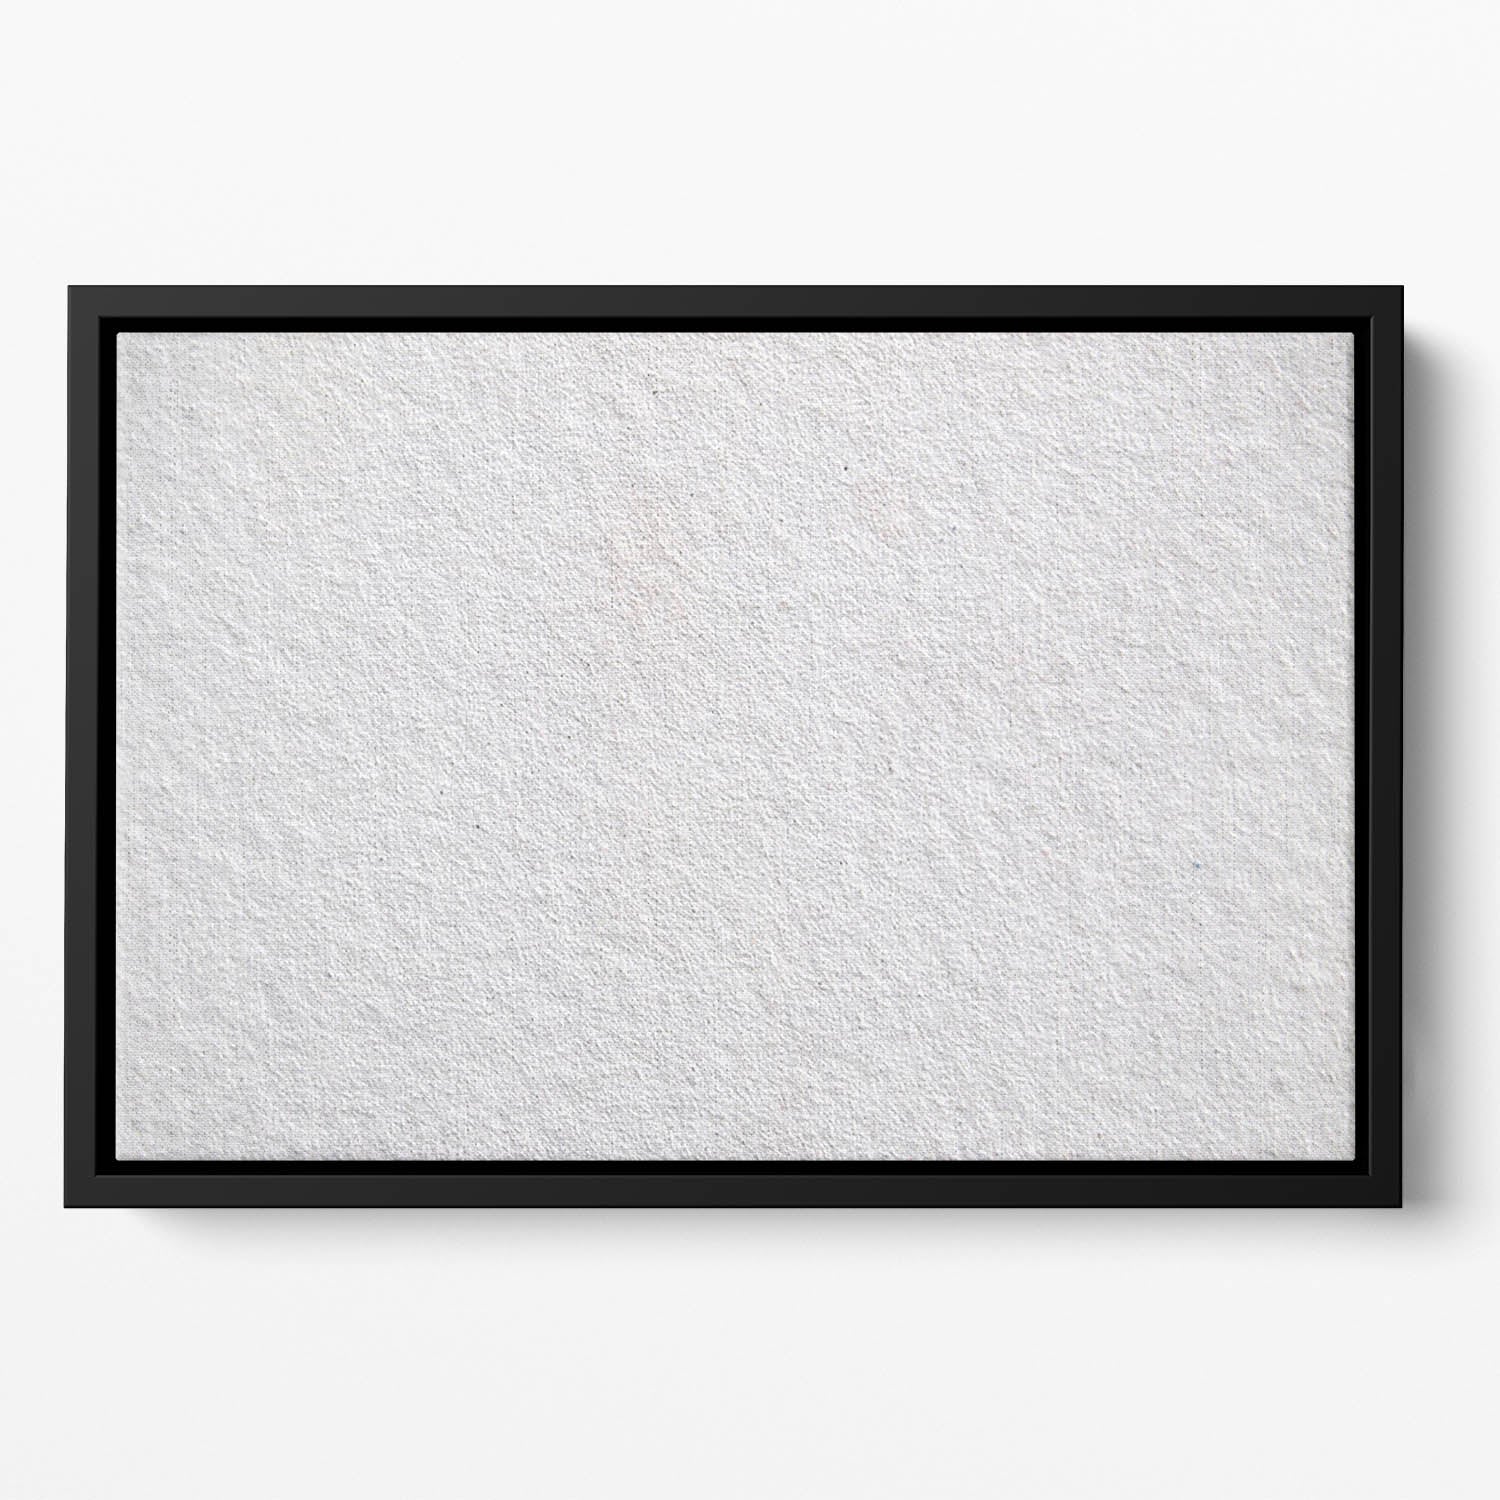 Cement texture Floating Framed Canvas